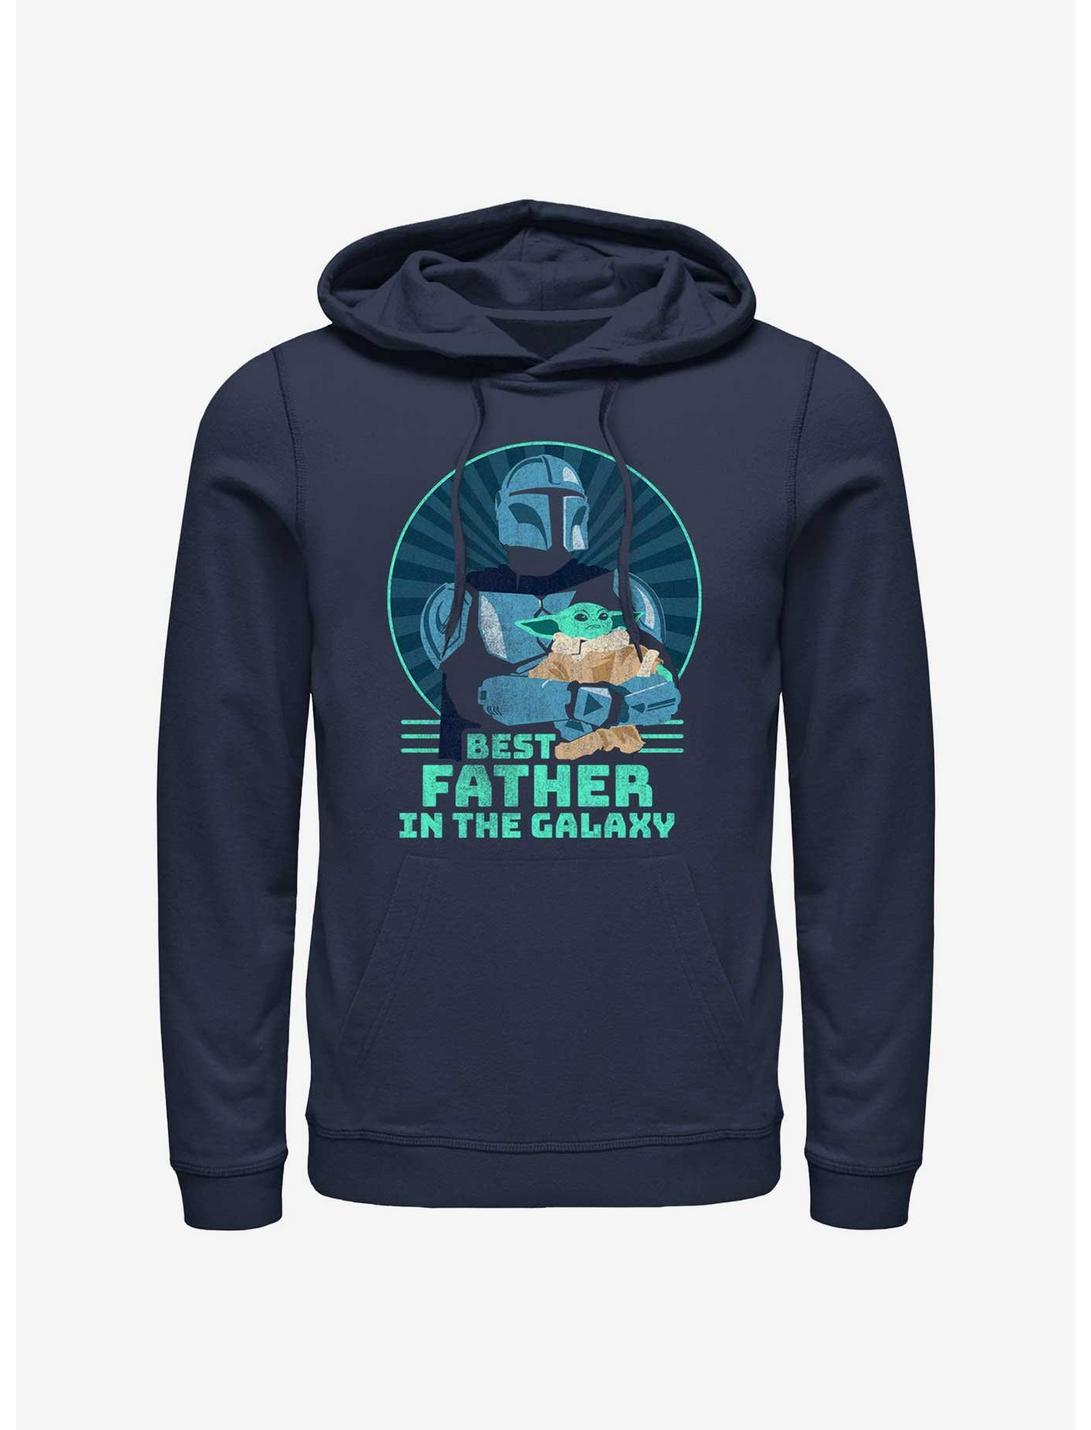 Star Wars The Mandalorian Best Father In The Galaxy Hoodie, NAVY, hi-res